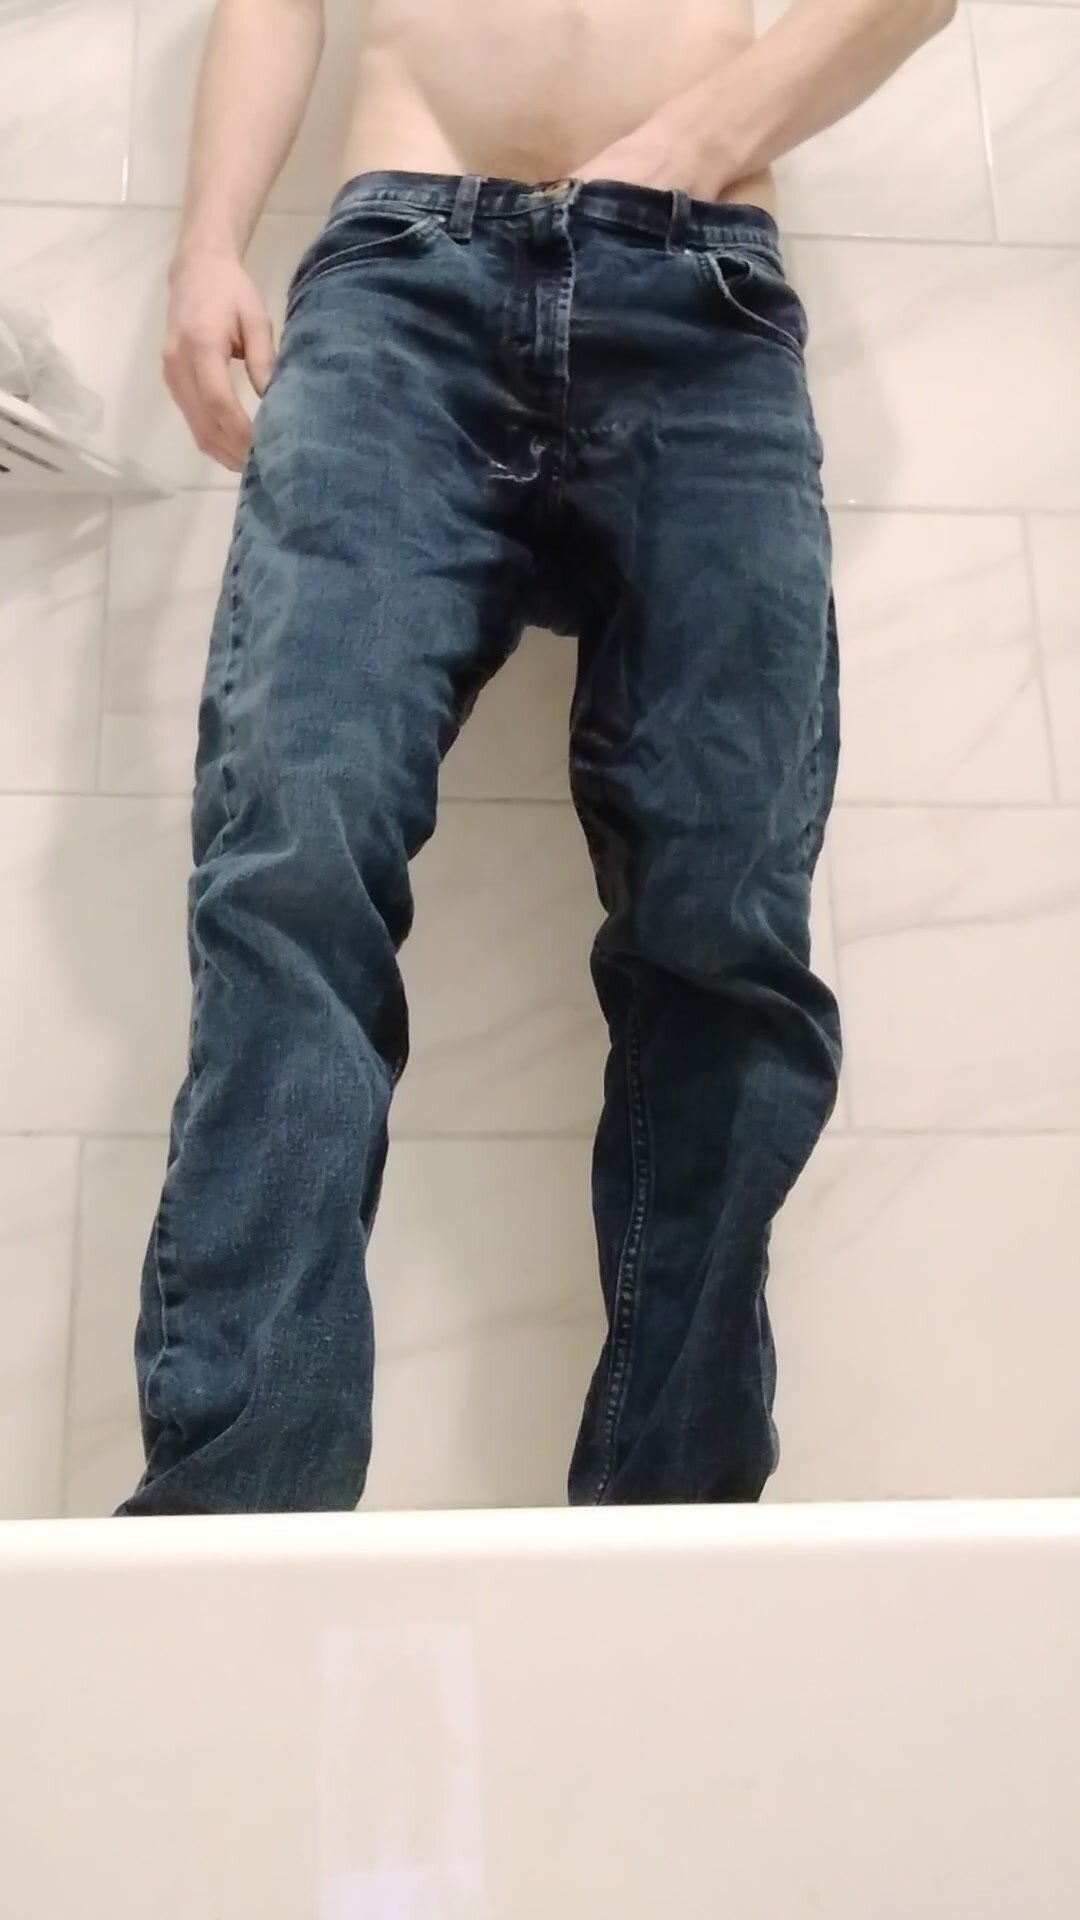 A morning piss in my jeans - video 2